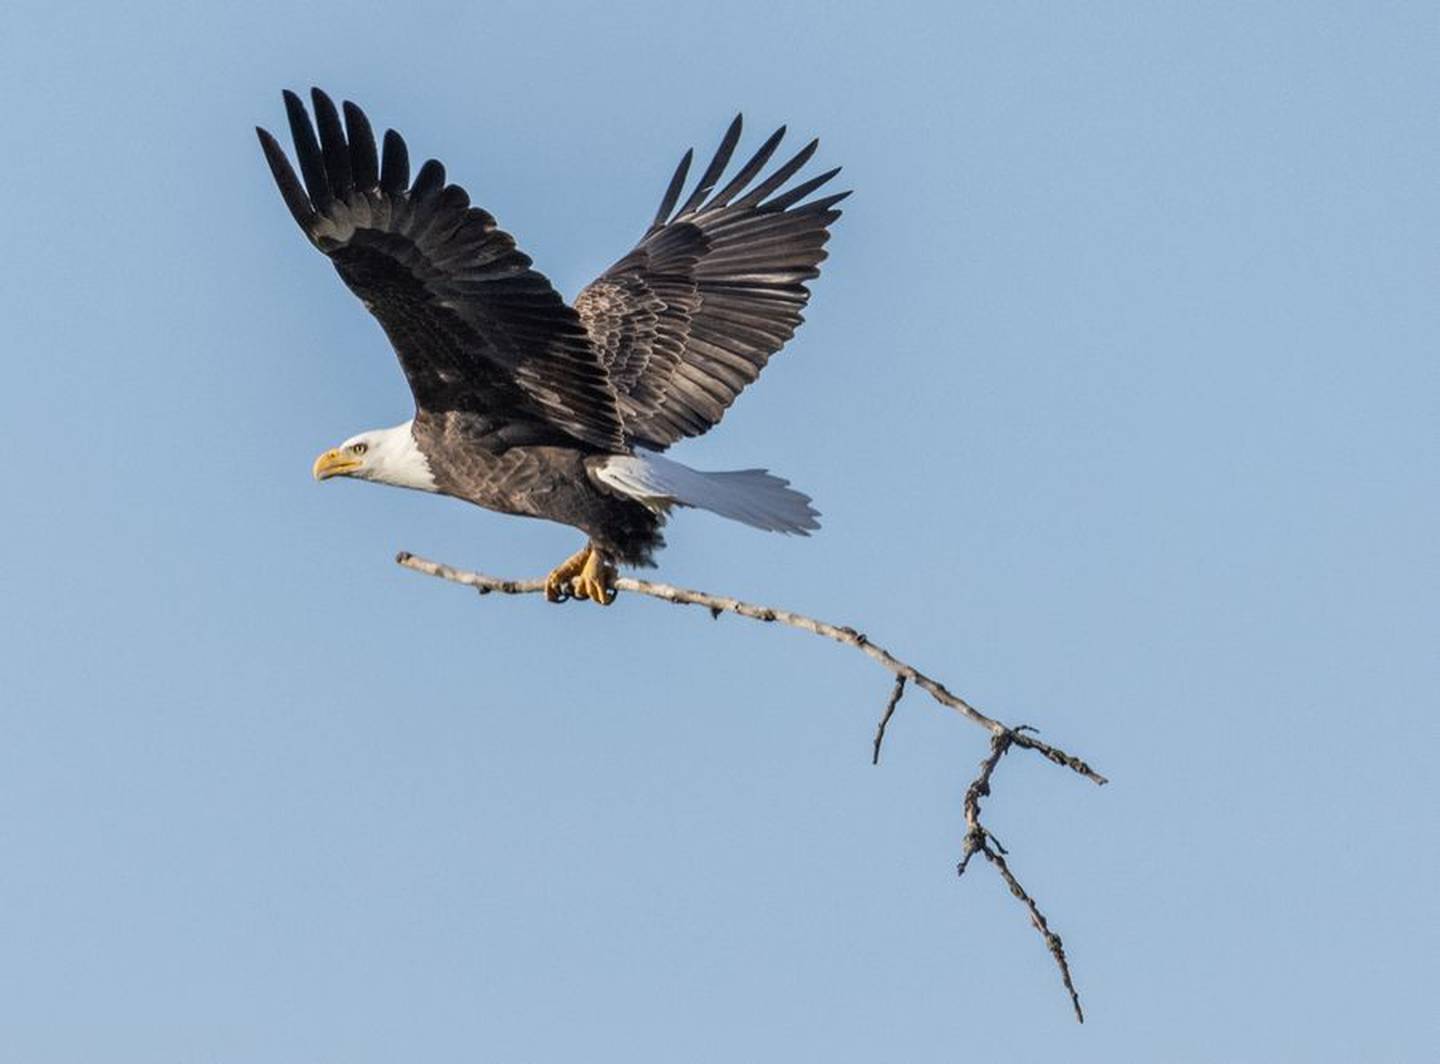 The male eagle on the Mooseheart campus flies in with a branch for the new nest. The tree the eagles lived in recently was removed, and the eagles are rebuilding their nest on a nearby tree.